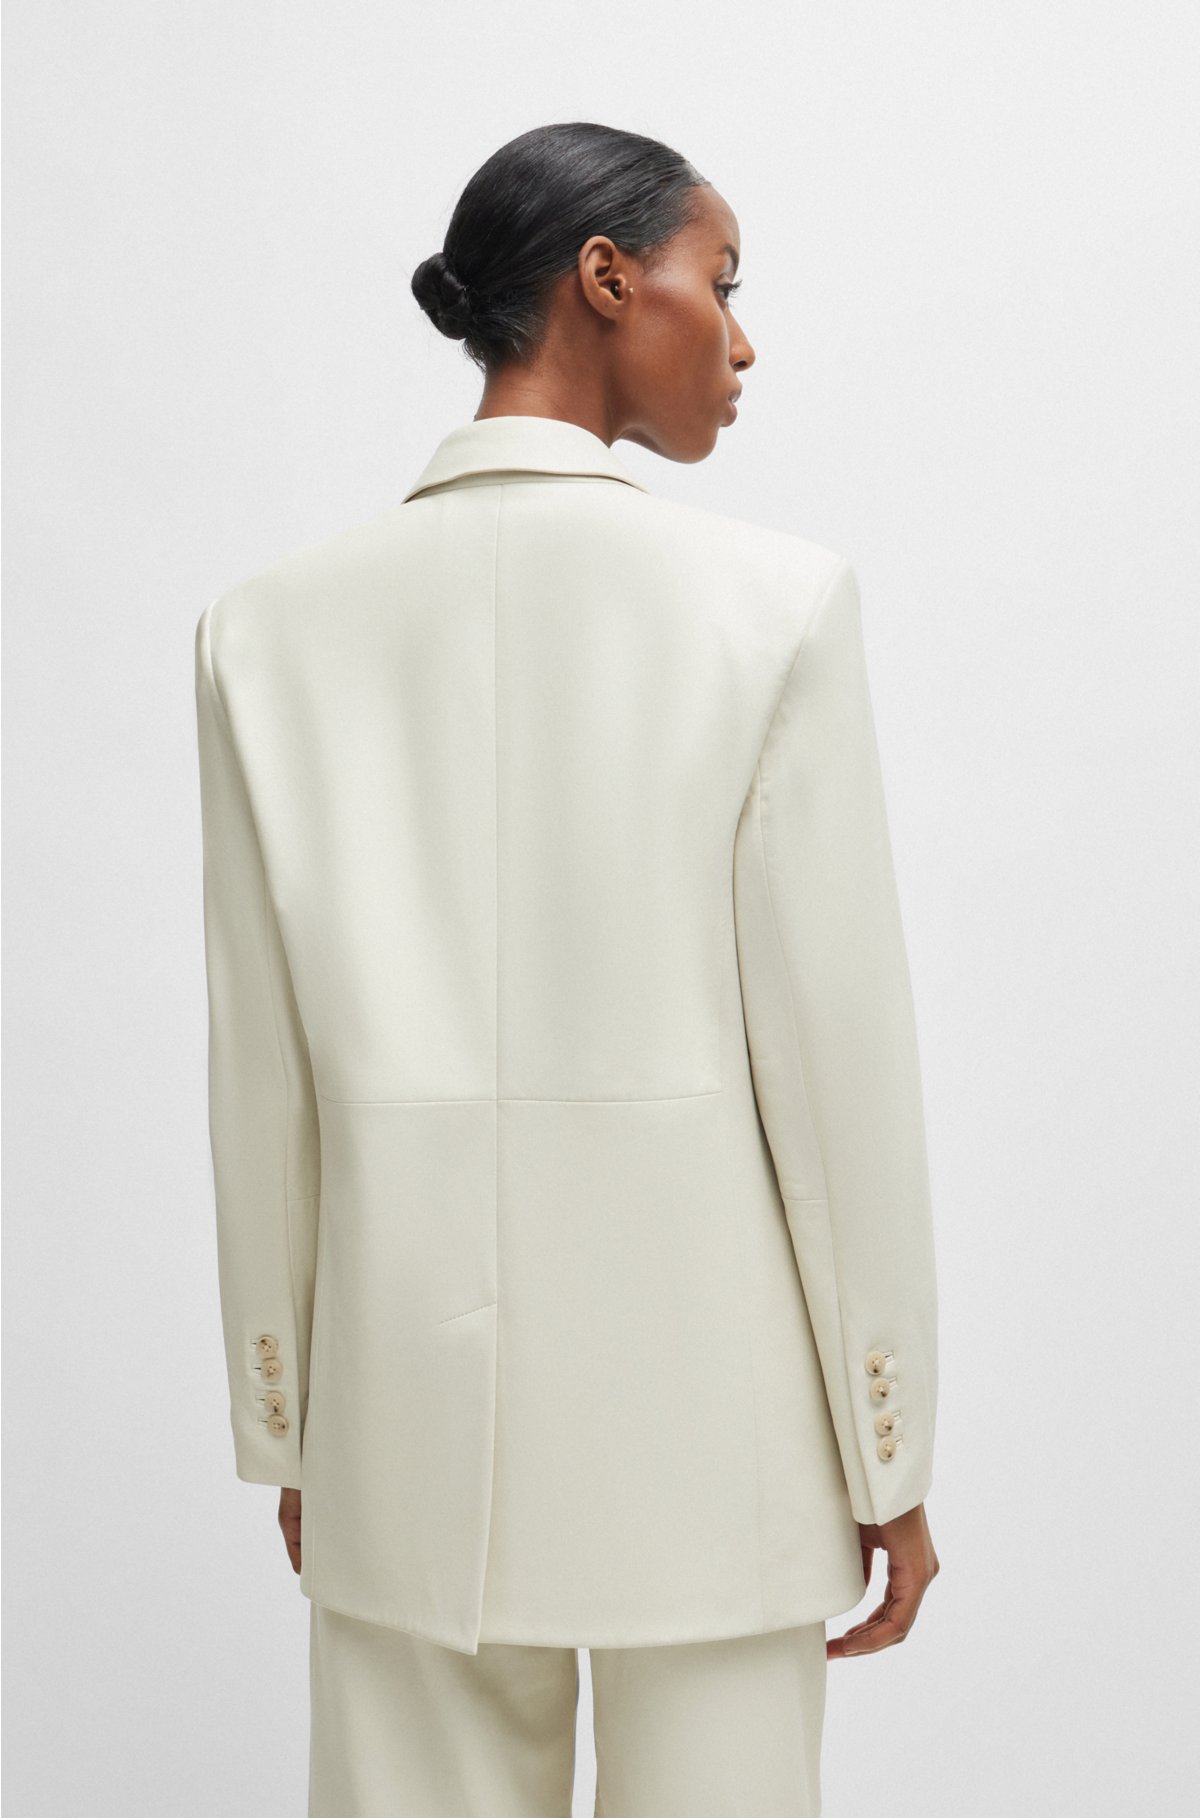 Longline double-breasted jacket in leather, White